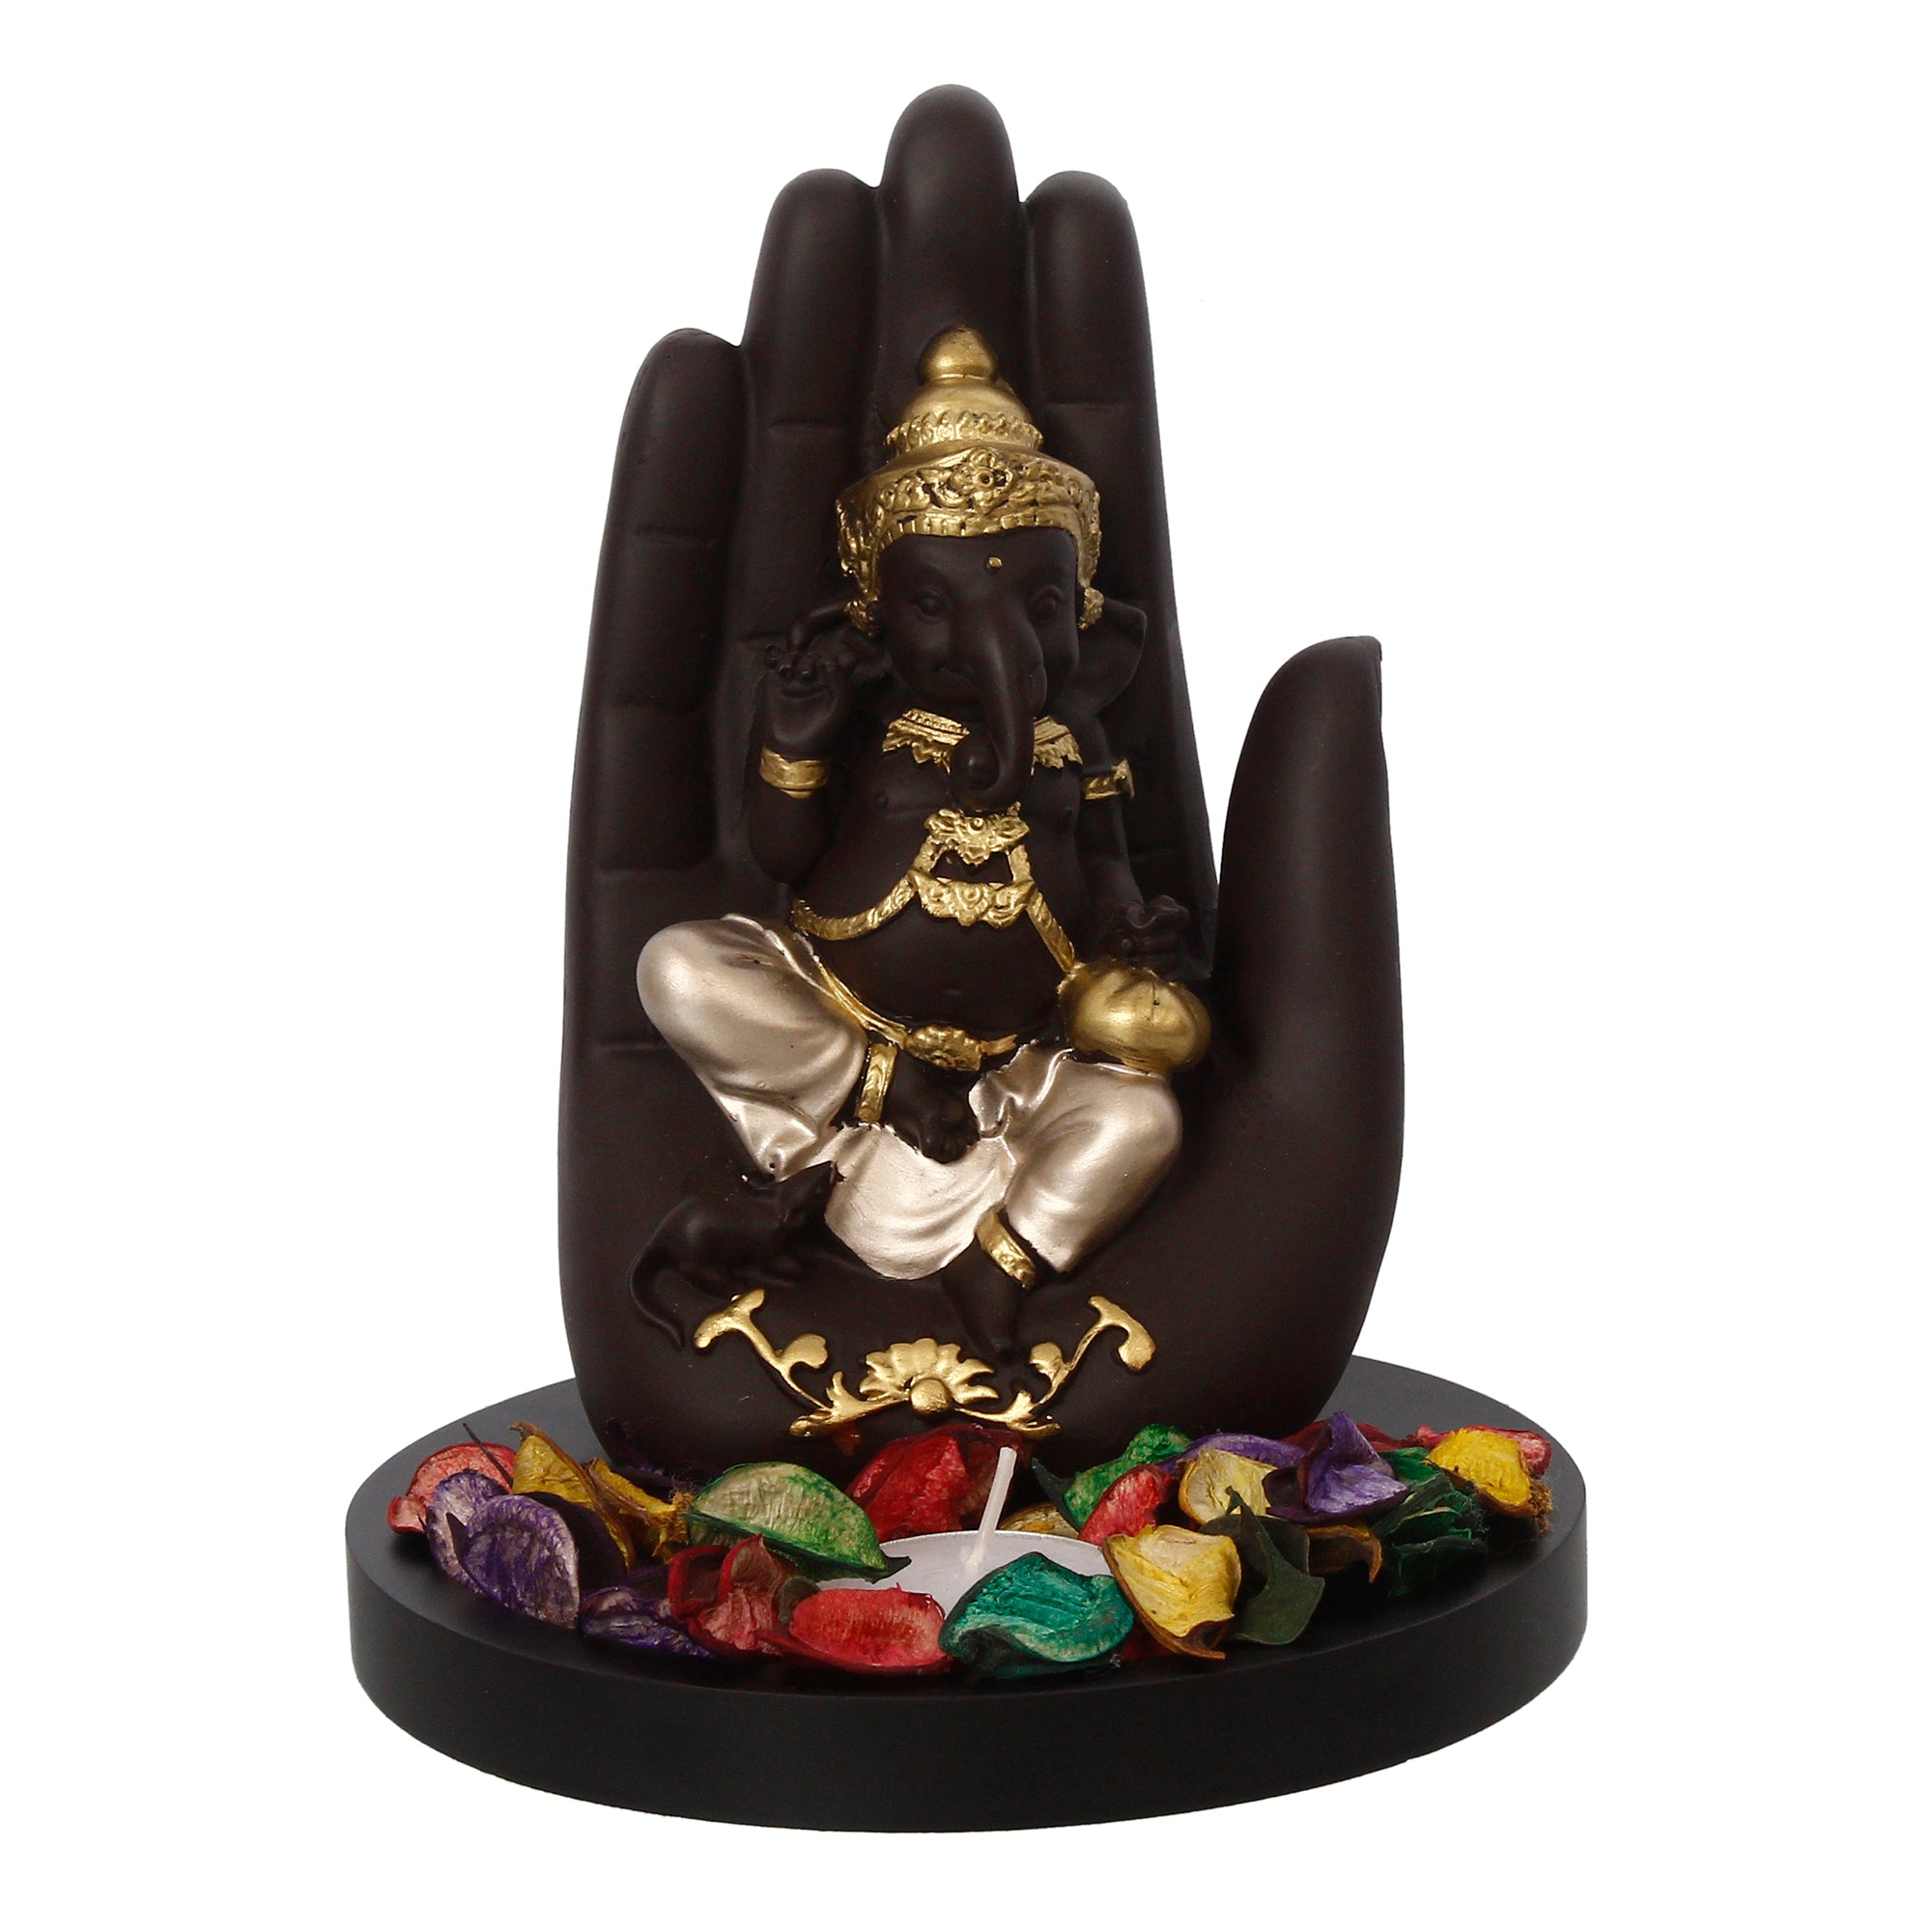 Golden and Black Handcrafted Palm Ganesha Idol on Wooden Base with Fragranced Petals Tealight Candle Holder 2